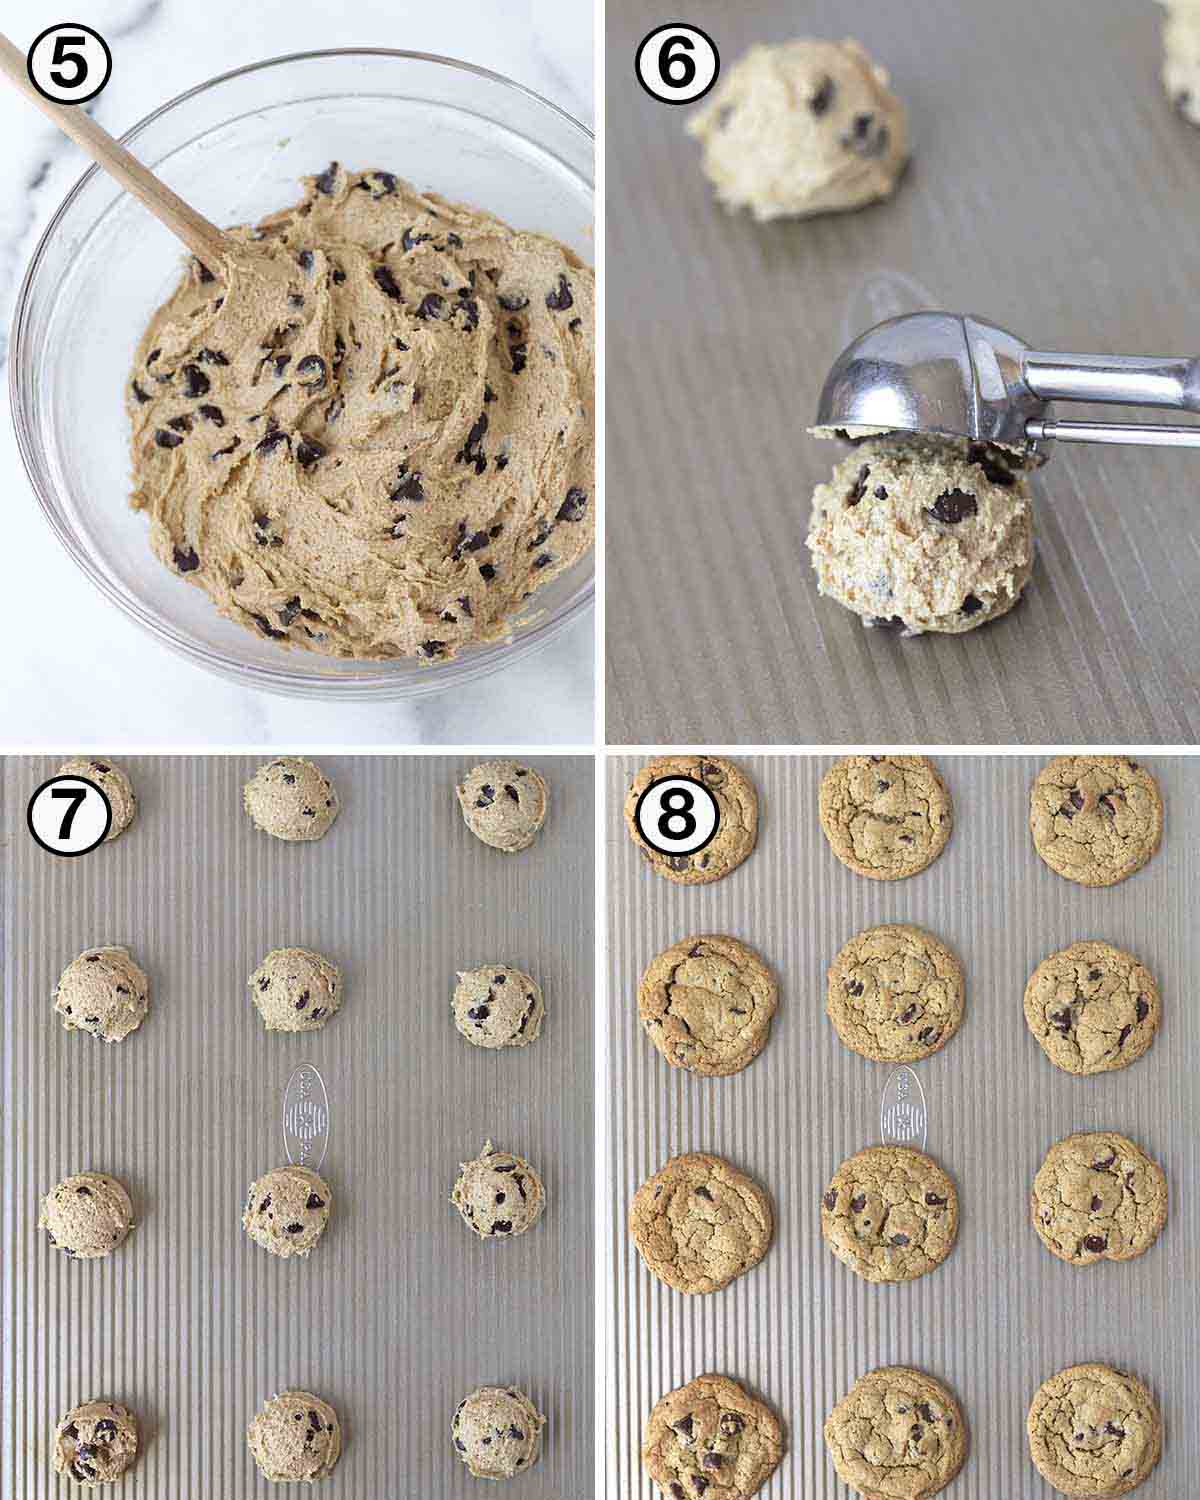 A collage of two images showing the final steps needed to make oat flour chocolate chip cookies.